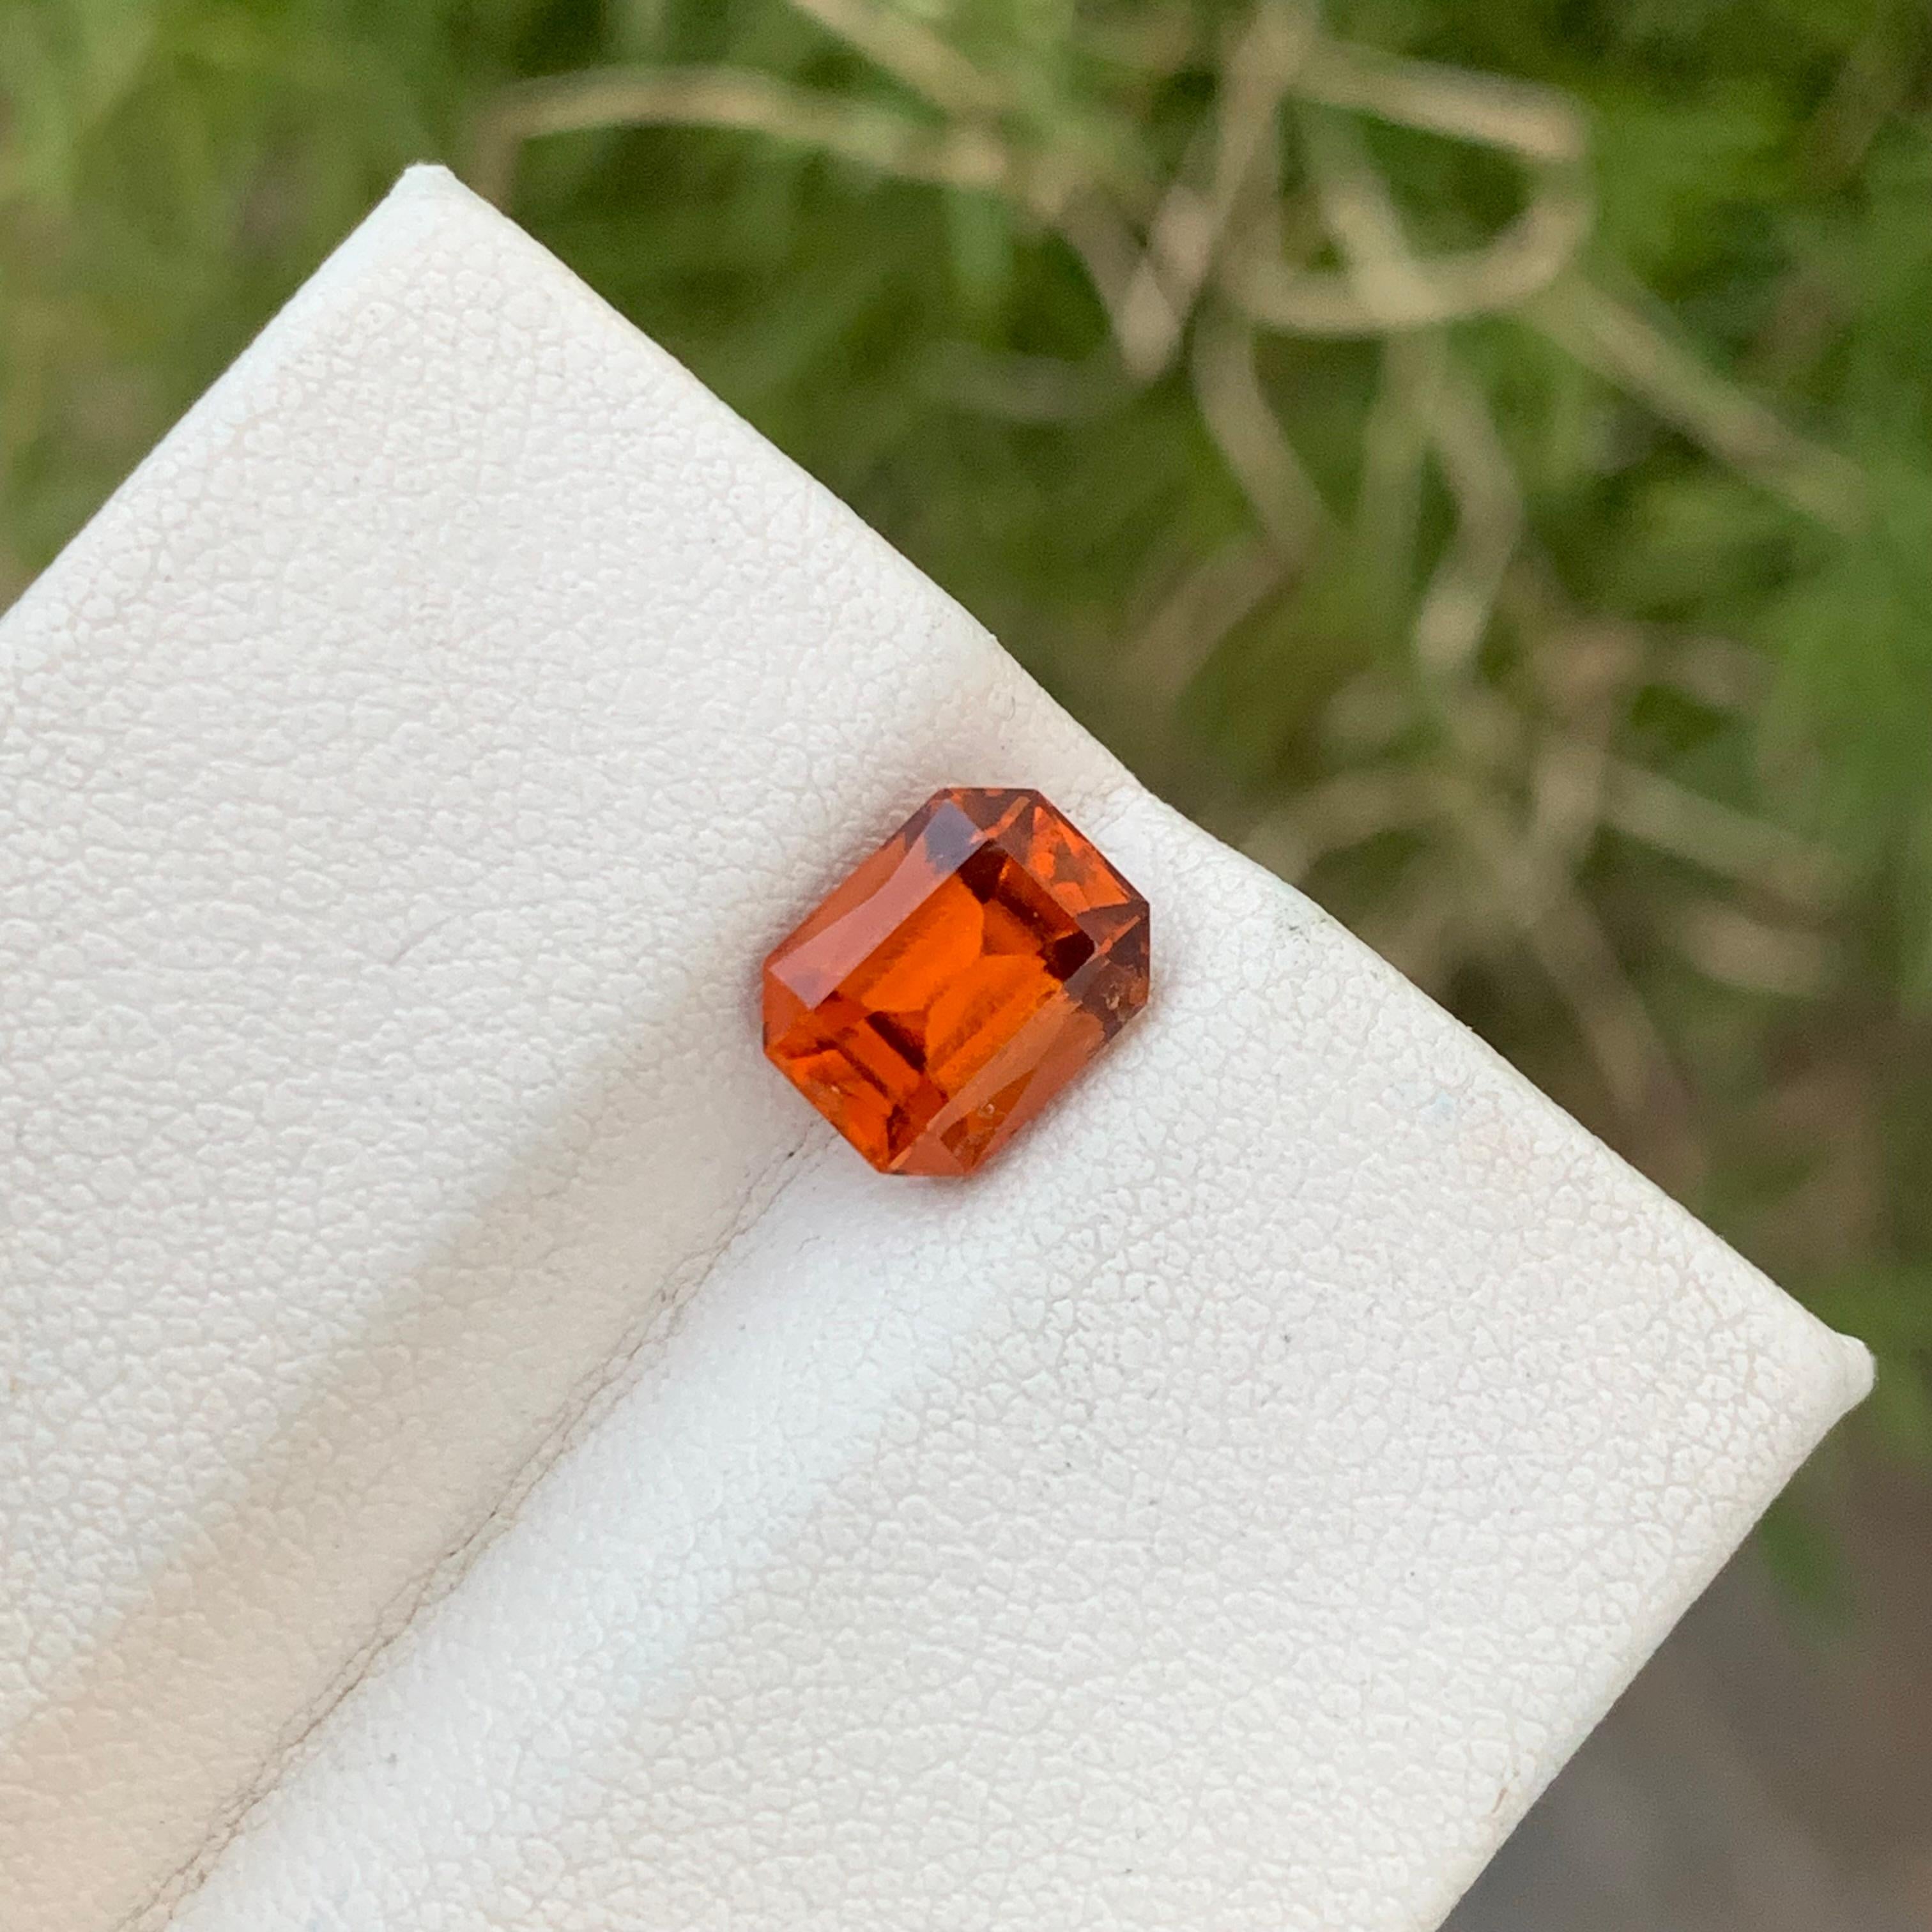 Loose Spessartine Garnet
Weight: 2.35 Carats
Dimension: 8.3 x 6.5 x 5.1 Mm
Colour: Orange
Treatment: Non
Shape: Emerald
Certificate: On Demand


Spessartine garnet, often referred to simply as spessartine, is a captivating gemstone prized for its